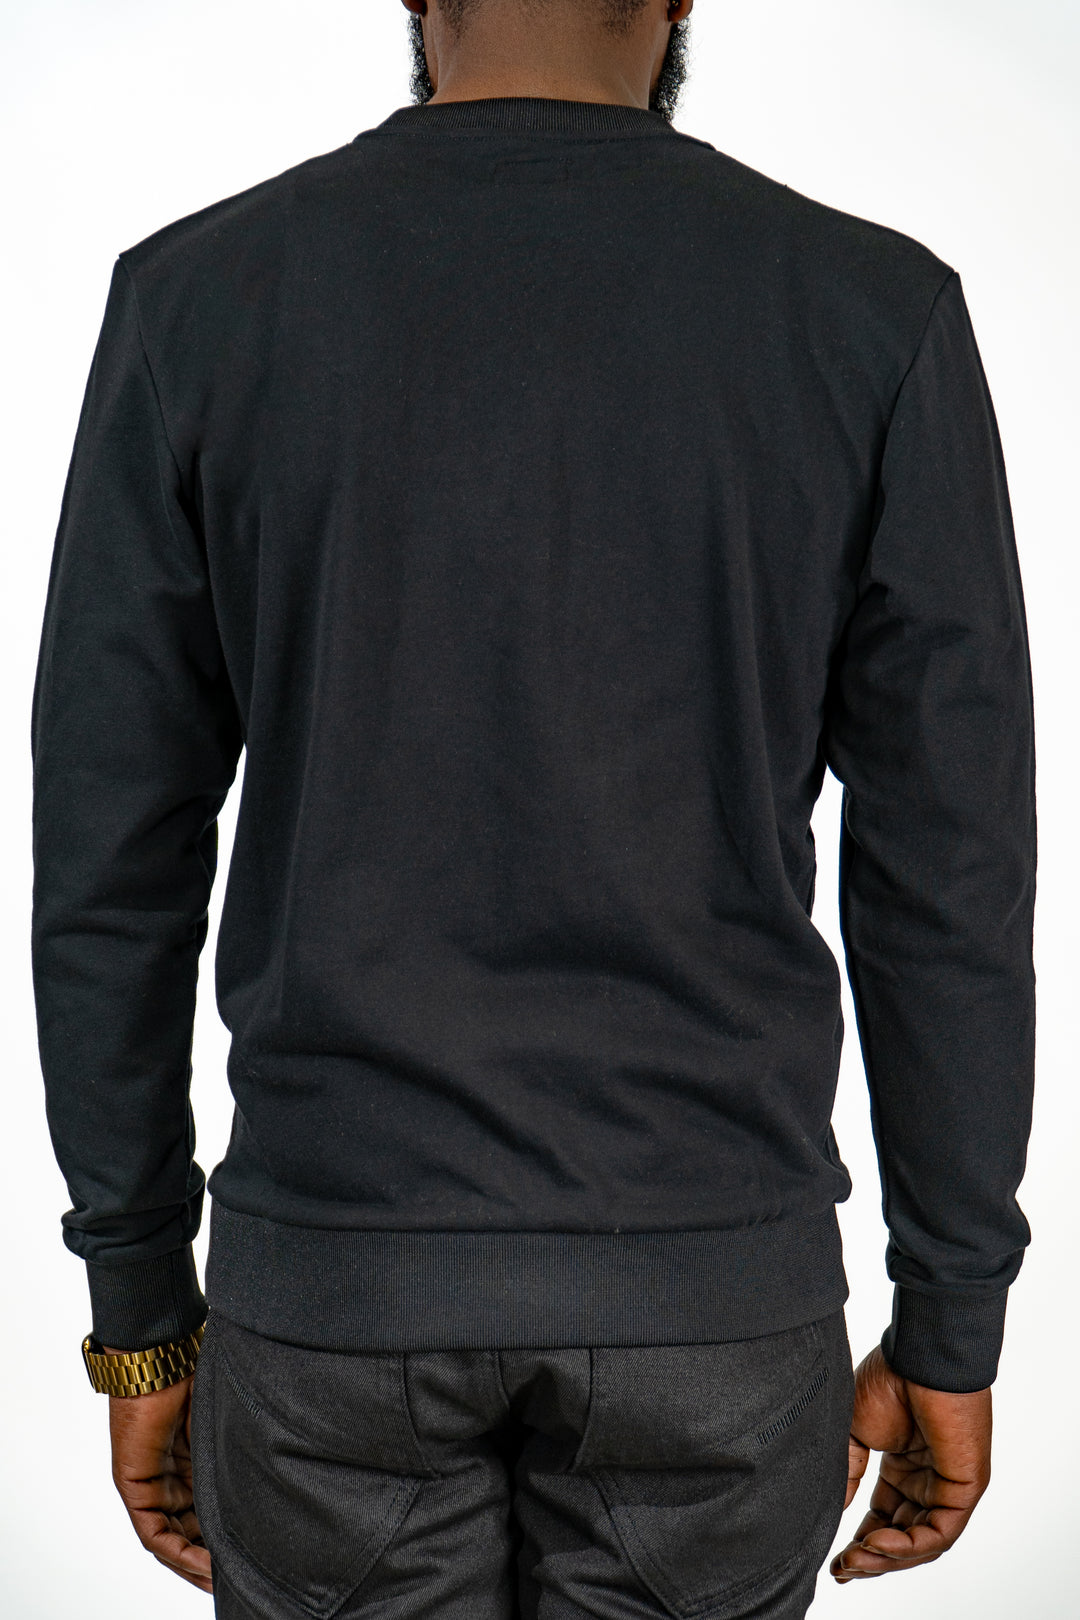 Back To Black Chenille Embroidery Crewneck